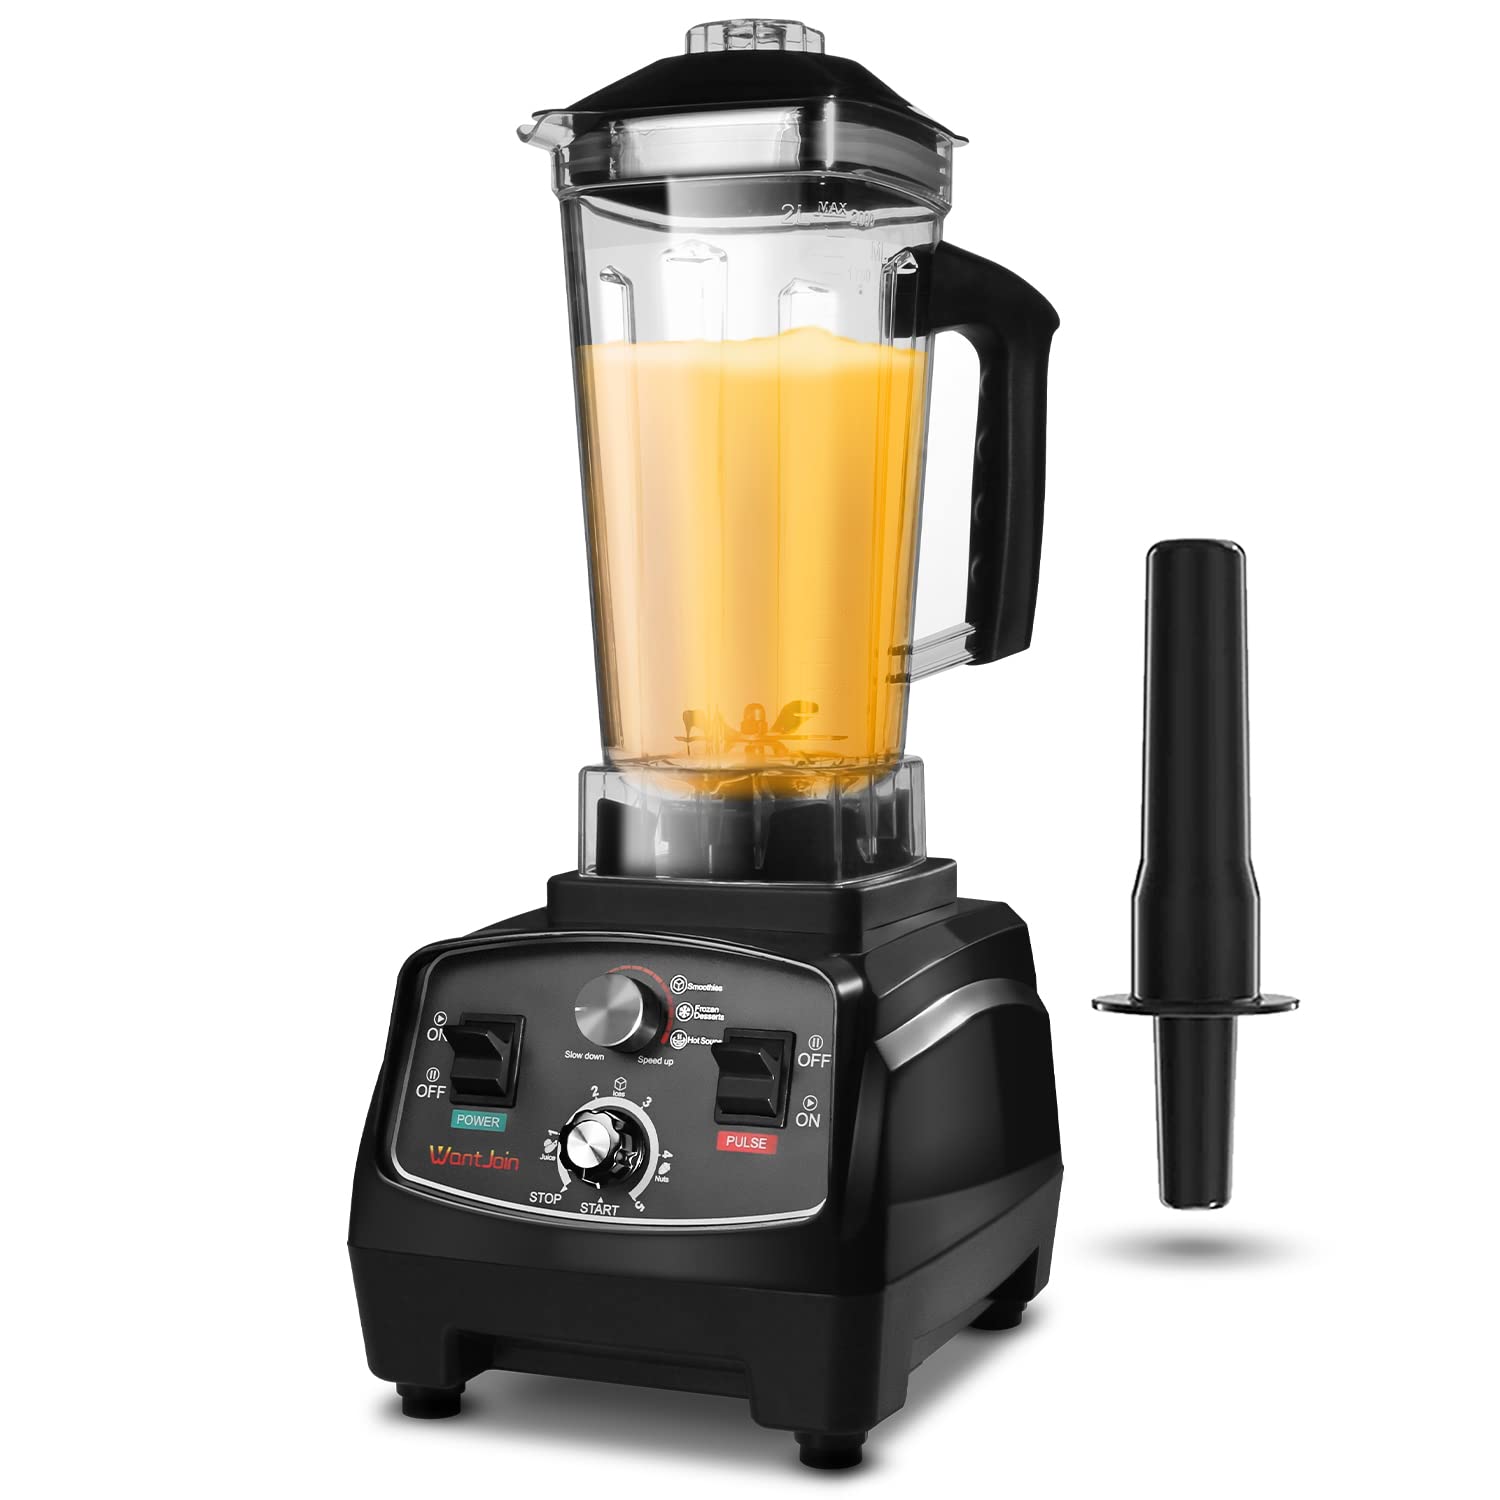 Mua WantJoin Professional Blender, Countertop Blender ,Blender for kitchen  Max 1800W High Power Home and Commercial Blender with Timer, Smoothie Maker  2200ml for Crushing Ice, Frozen Dessert, Soup,fish trên Amazon Mỹ chính